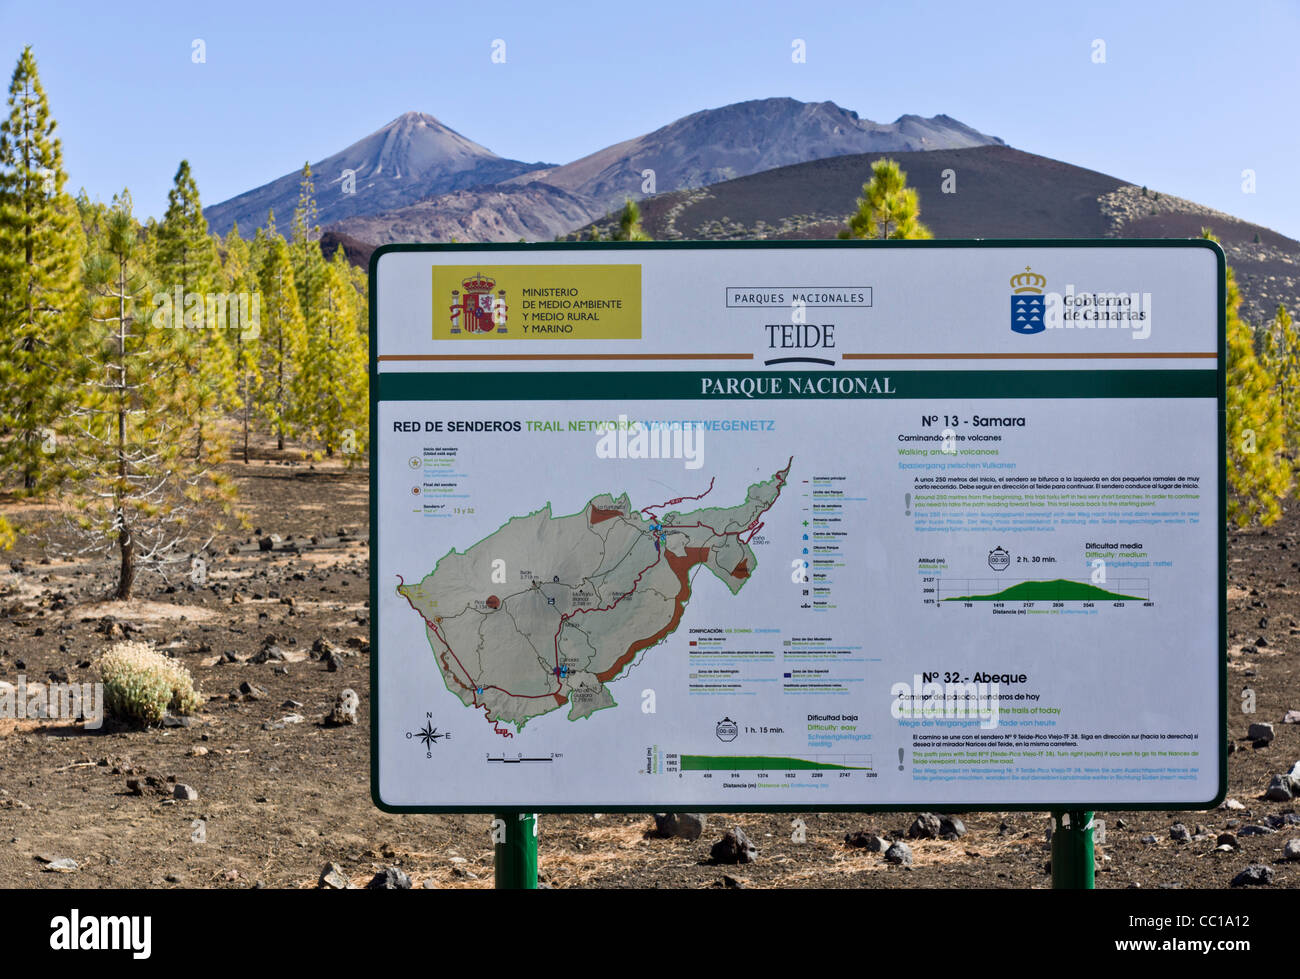 The Samara volcano footpaths, approach to Mount Teide, Tenerife. Information and map board. Stock Photo